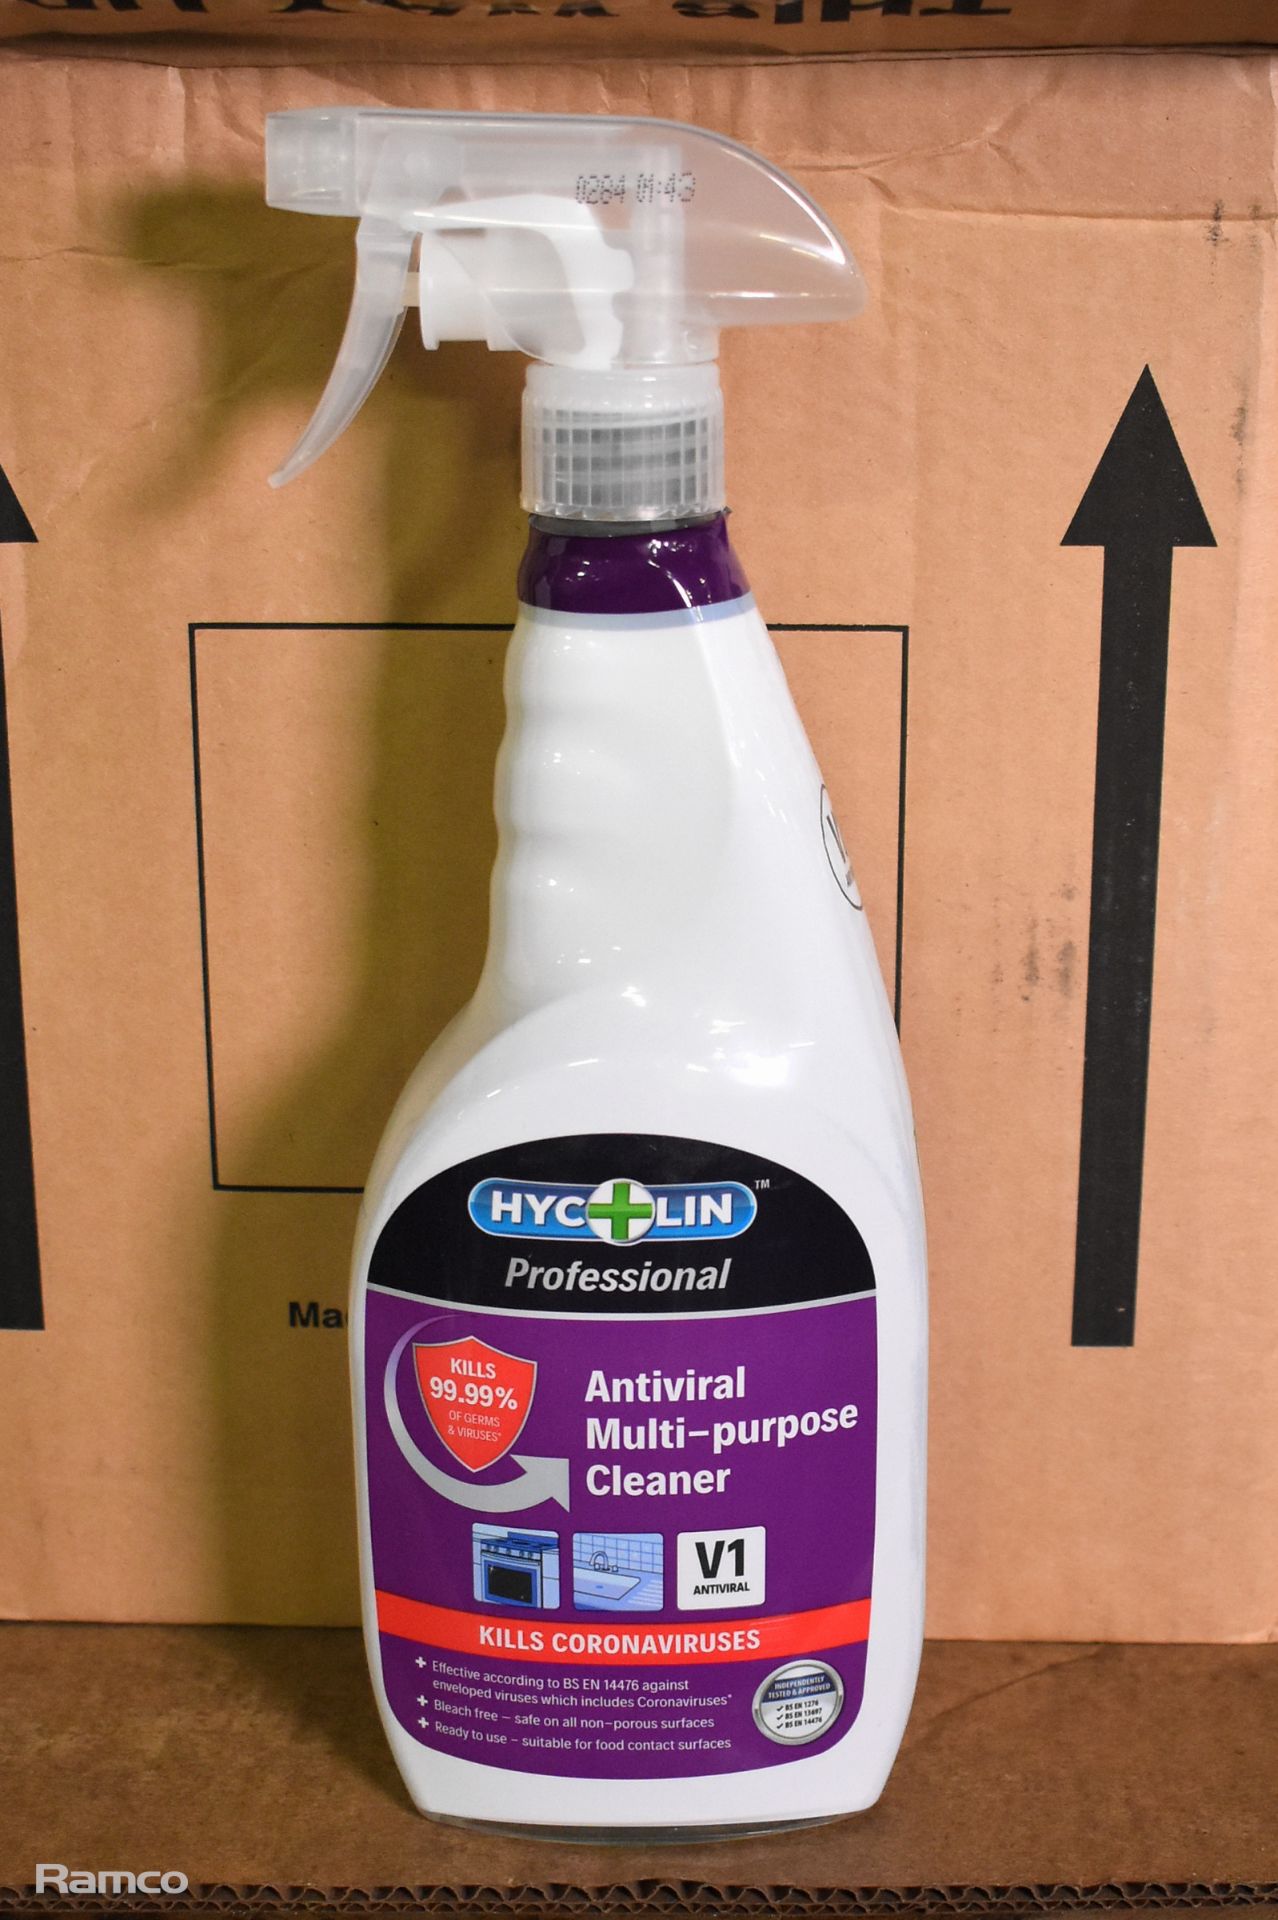 Multi-purpose cleaner disinfectant 5ltr and hand sprays, fabric refresher spray, empty hand sprayer - Image 5 of 11